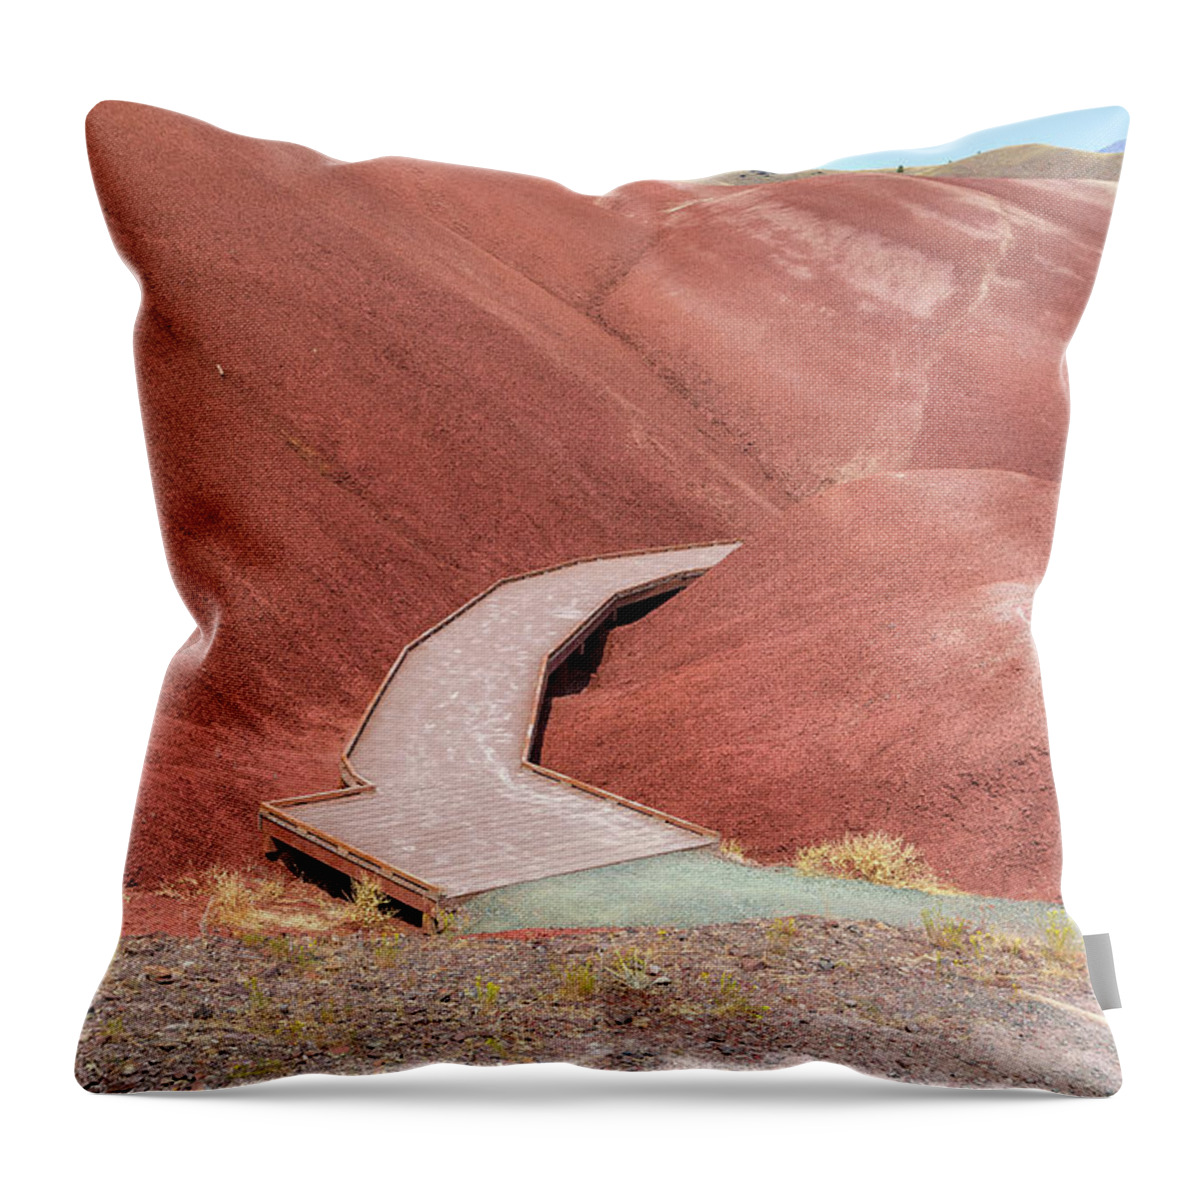 Painted Hills Throw Pillow featuring the photograph Hiking Loop Boardwalk at Painted Hills Cove by David Gn